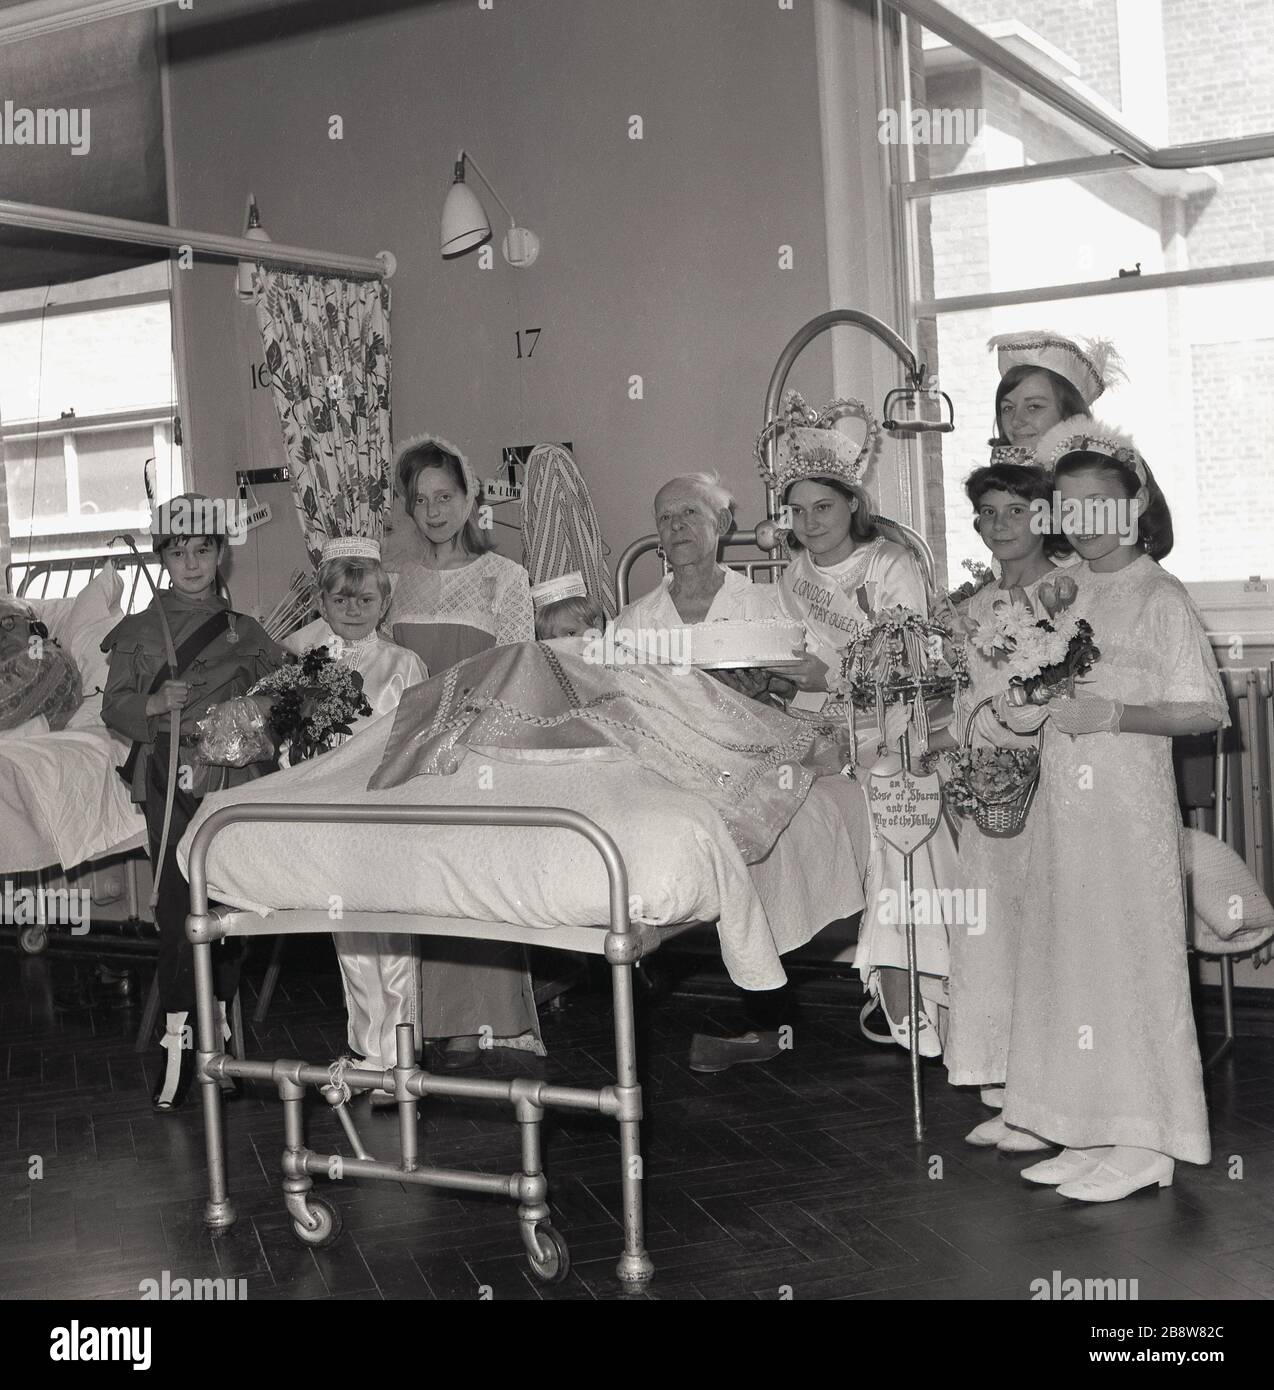 1960s, historical, a visit to a hospital ward by the newly crowned London May Queen,a young teenage girl and entourage, a group of young children dressed in costumes, Lewisham, South East London, England, UK. The children sit beside an elderly male patient sitting in his bed having presented him with a birthday cake. Stock Photo